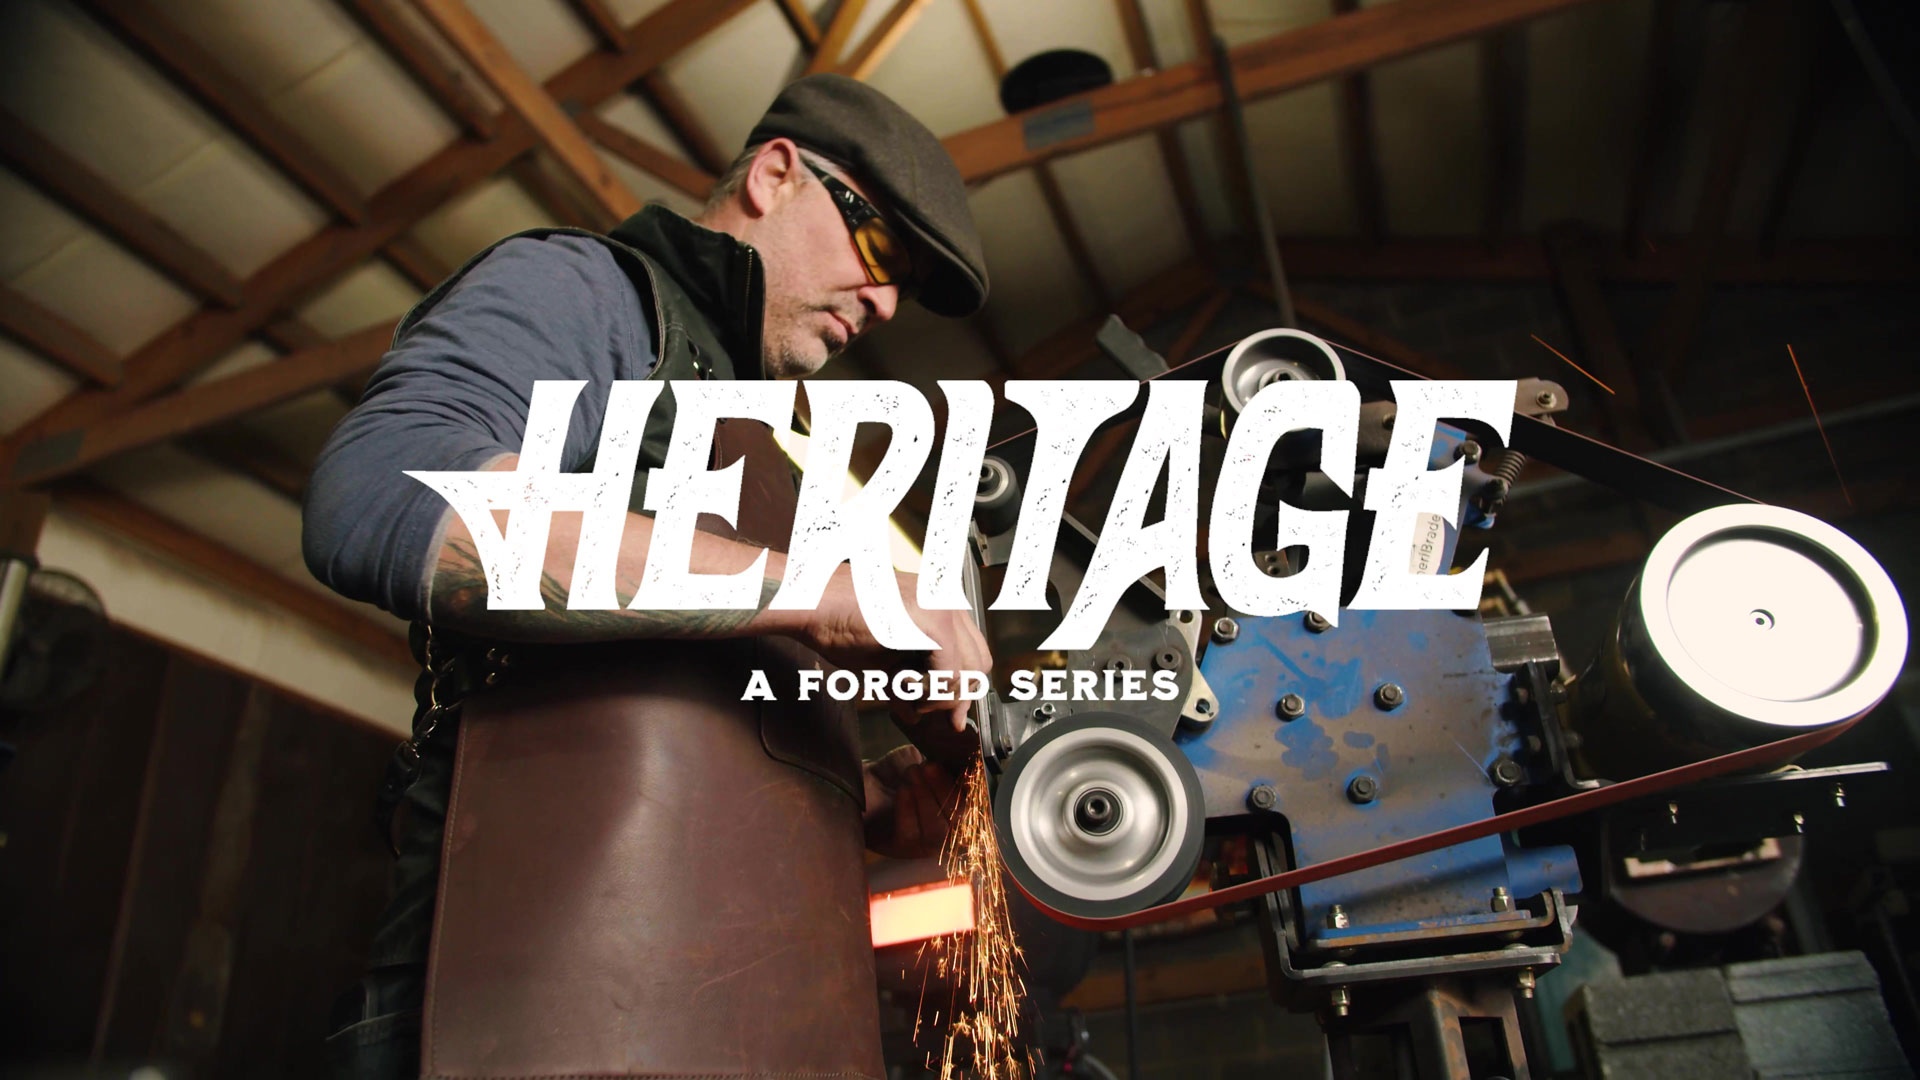 A digital image showcasing the logo of Knight Forge, heritage series , company known for its craftsmanship and creativity.